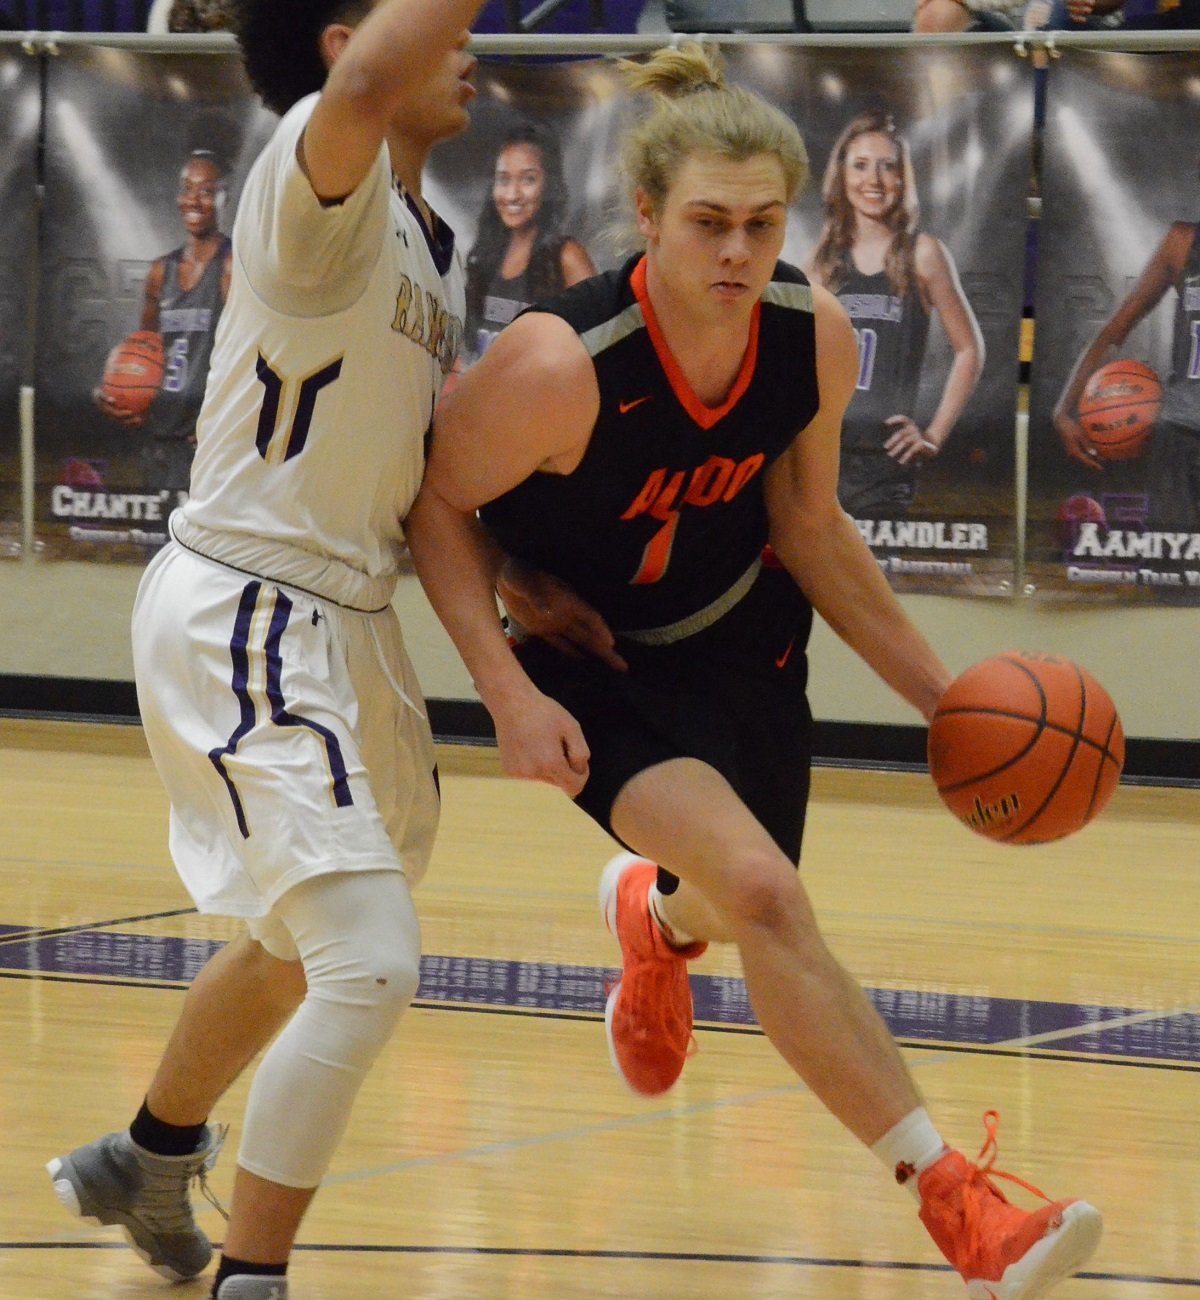 Aledo senior post Cam Caldwell drives the baseline Friday night during the Bearcats' loss at Chisholm Trail. Caldwell led the Bearcats with 11 points. Photo by Tony Eierdam